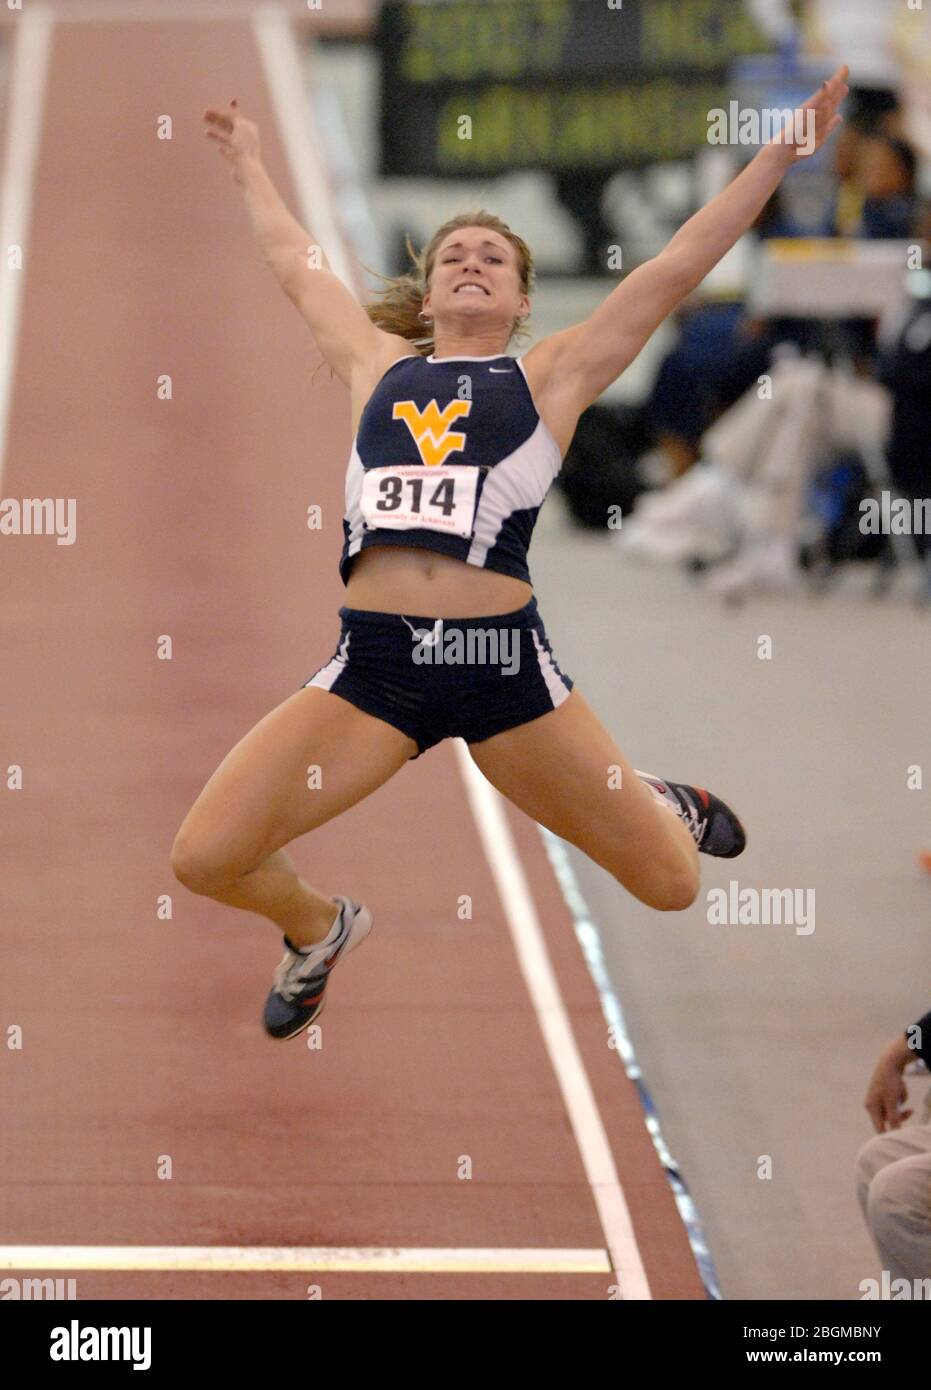 https://c8.alamy.com/comp/2BGMBNY/abbie-stechschulte-of-west-virginia-had-a-best-effort-of-19-5-14-592m-in-the-pentathlon-long-jump-in-the-ncaa-indoor-track-field-championships-at-the-randal-tyson-track-center-at-the-university-of-arkansas-in-fayetteville-ark-on-saturday-march-10-2007-stechschulte-finished-sixth-overall-with-4085-points-photo-via-newscom-2BGMBNY.jpg